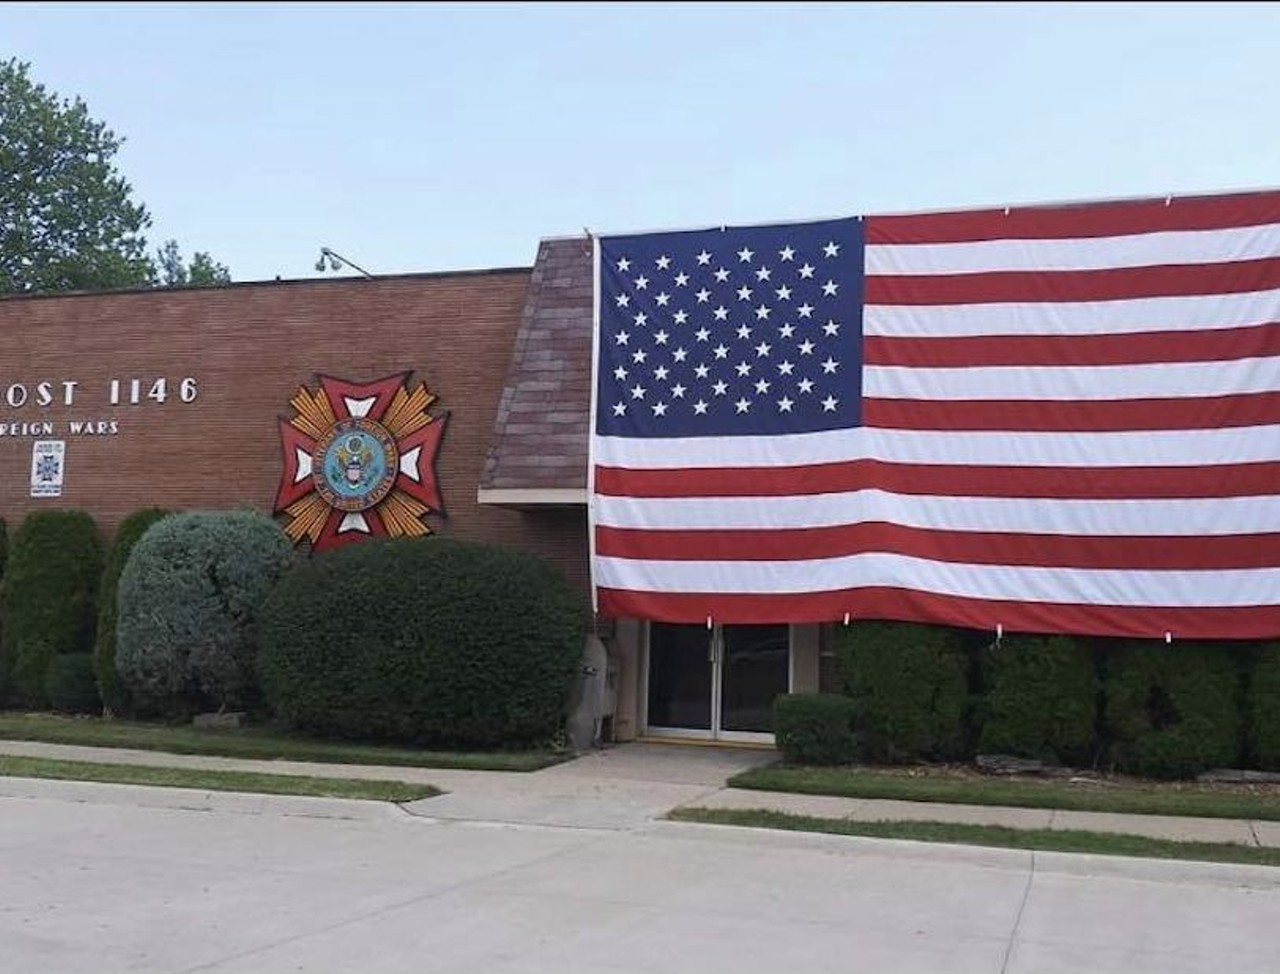 VFW 1146 Bruce Post
28404 Jefferson Ave., St. Clair Shores; vfw1146brucepost.org
This VFW hall will host a fish fry from 4 p.m.-8 p.m. every Friday through Lent. 
Photo via VFW 1146 Bruce Post/Facebook